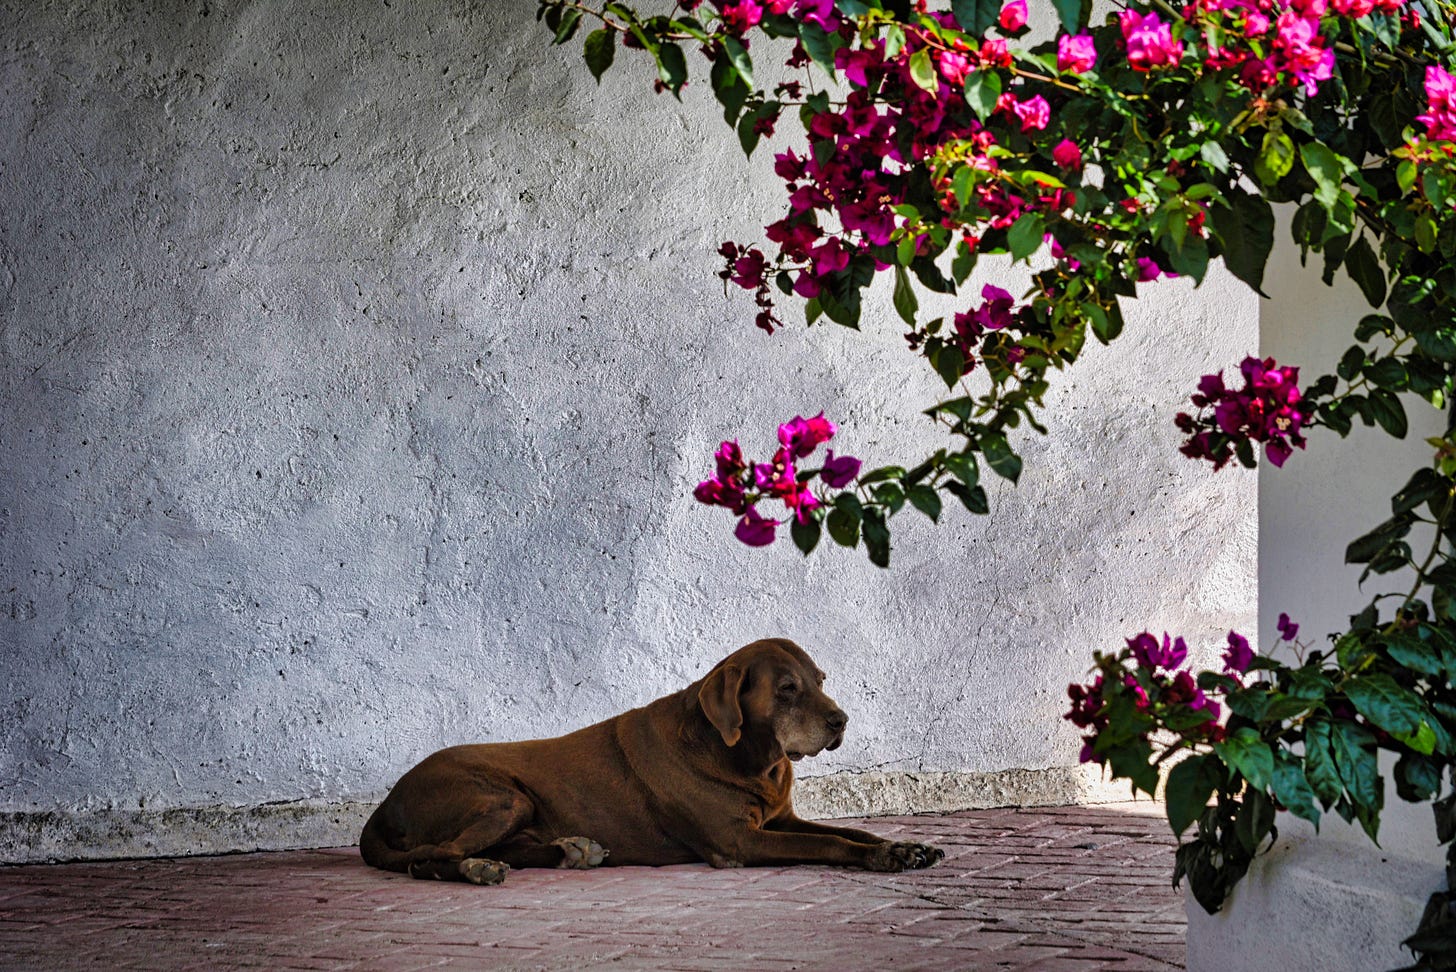 A big browen dog lying in the shade of a concrete purch with red bougainvilla off to the right